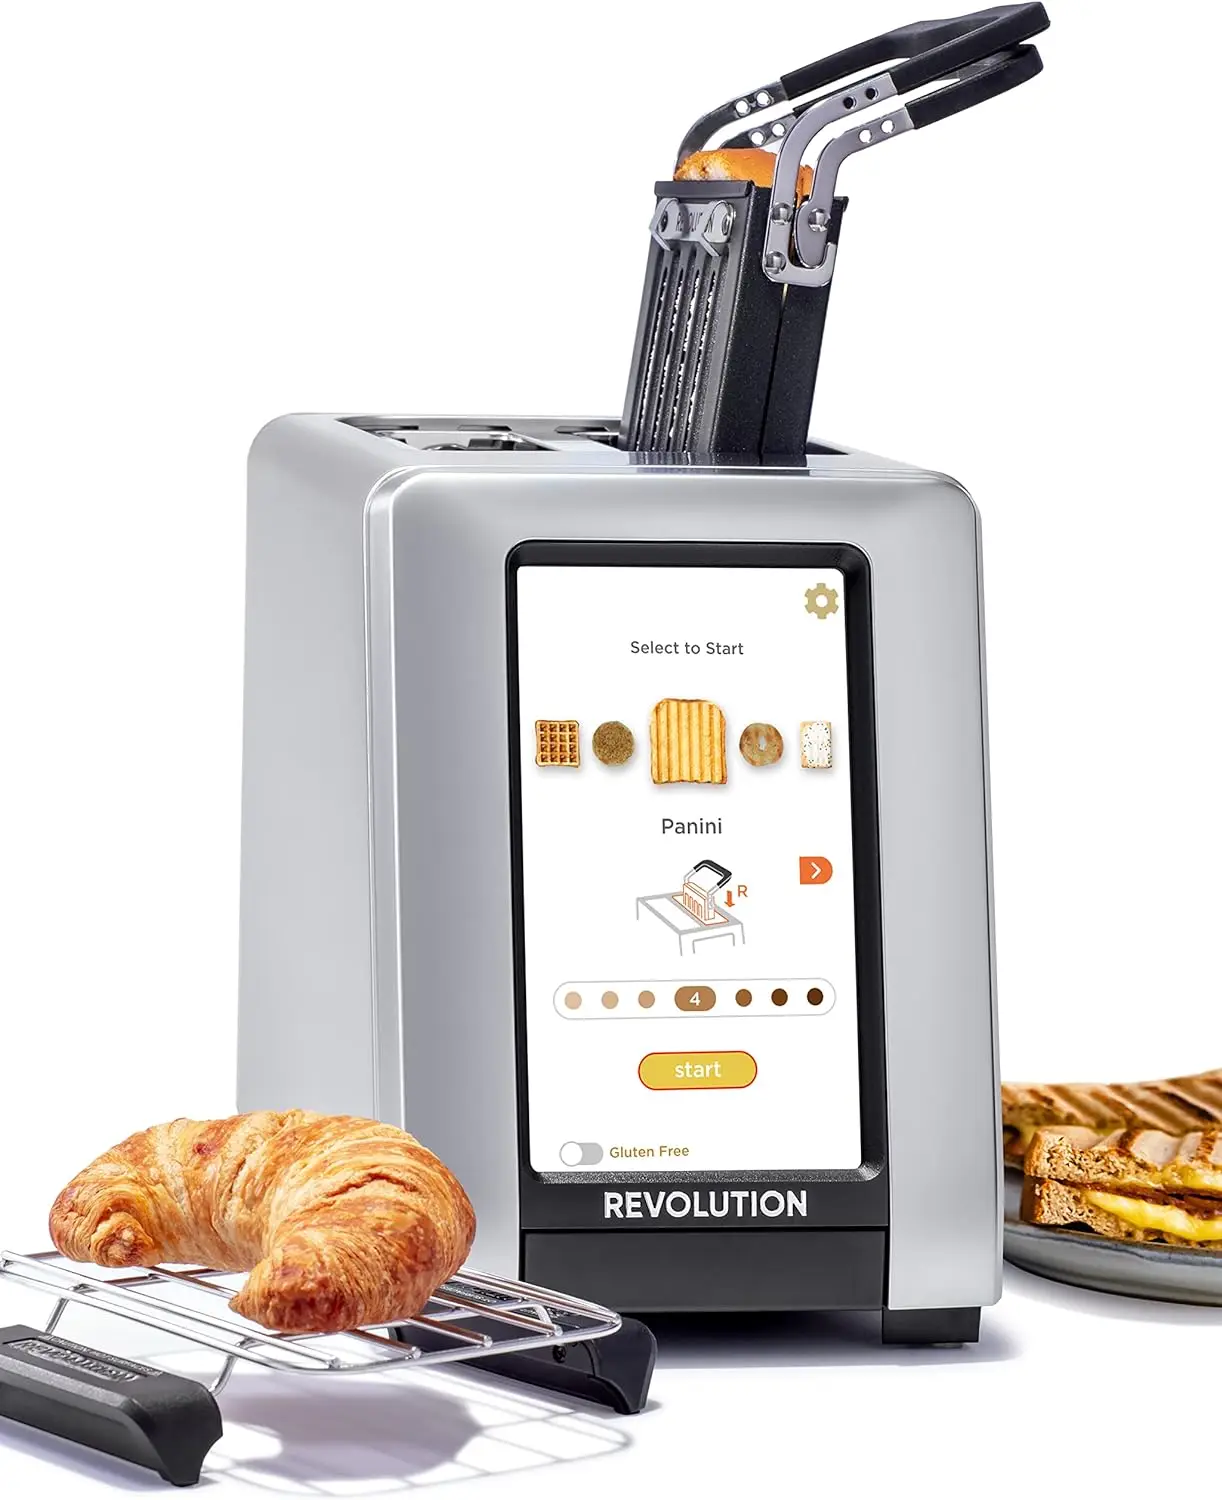 

R270 High-Speed Touchscreen Toaster, 2-Slice Smart Toaster with Patented InstaGLO Technology, Warming Rack & Panini Press